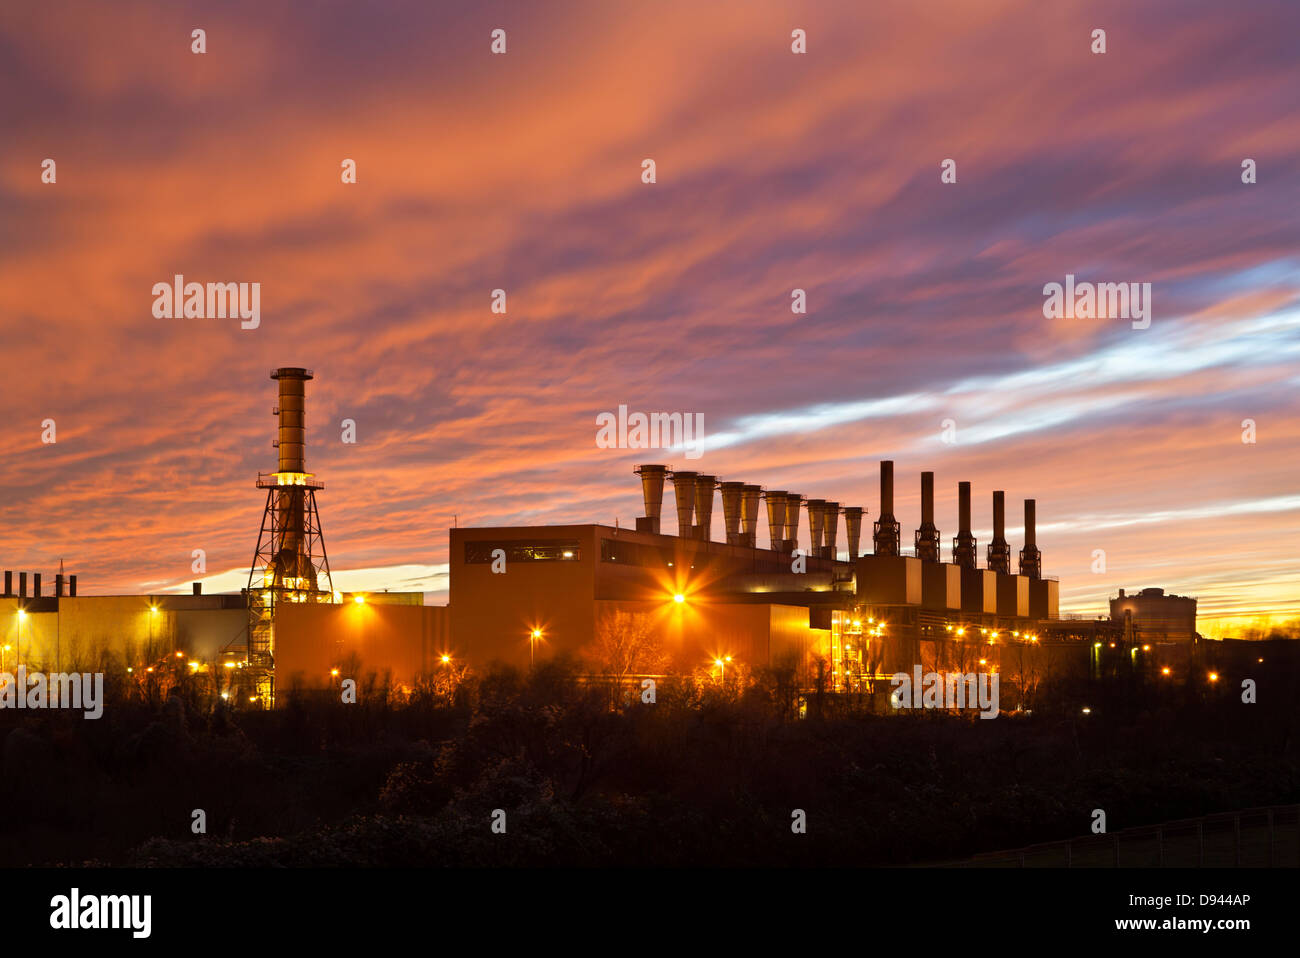 Steel plant with a evening sky looking like it is on fire. Stock Photo